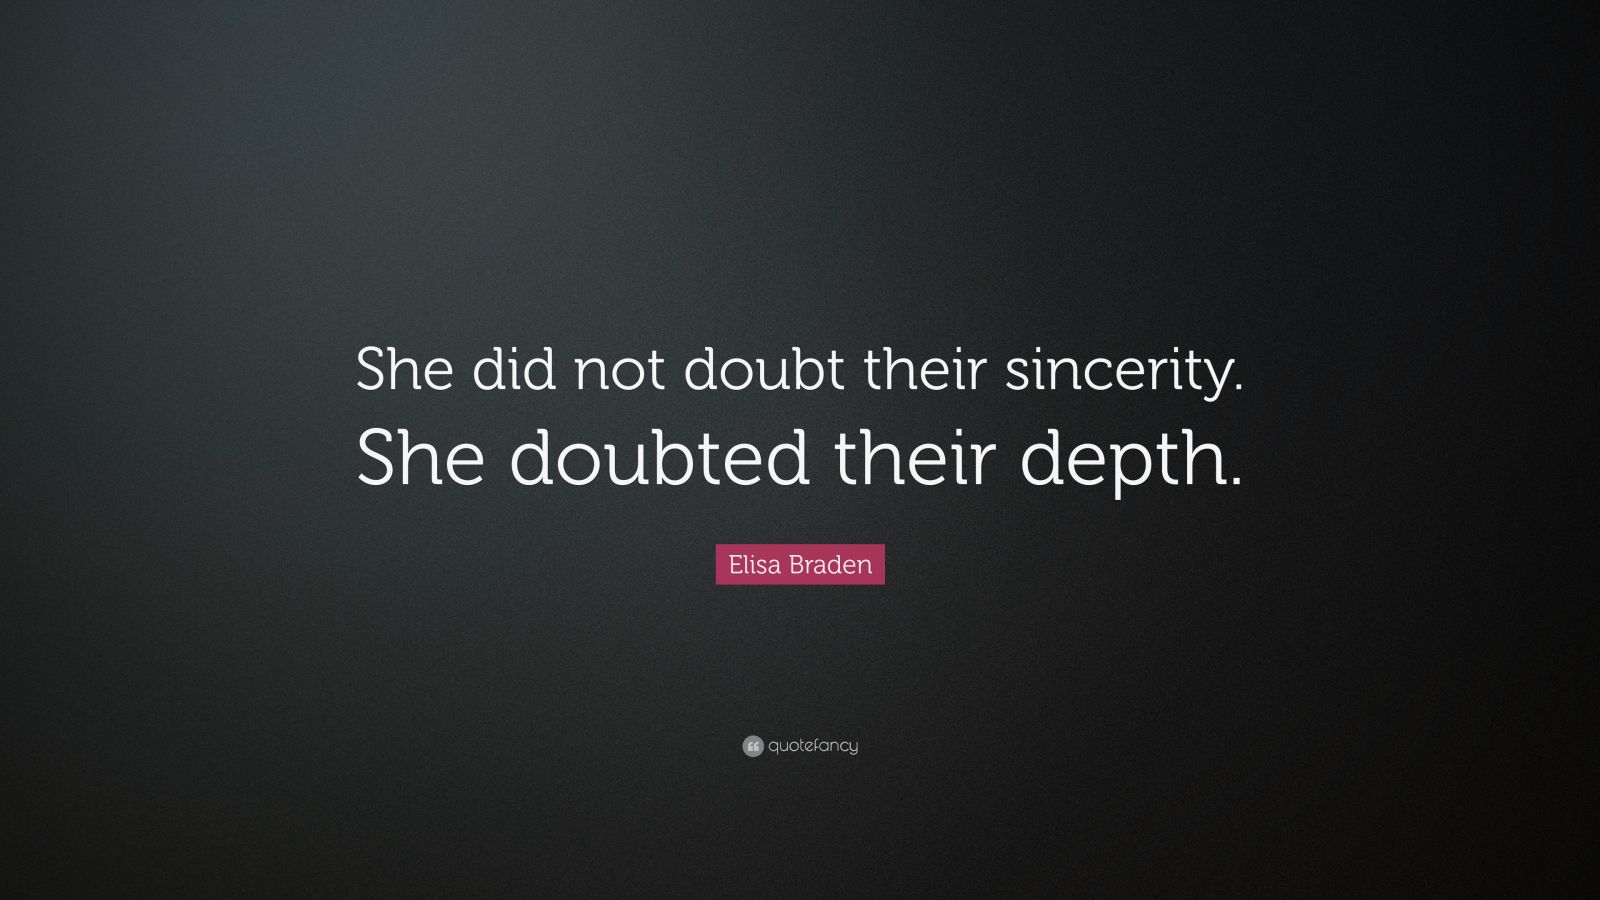 Elisa Braden Quote: “She did not doubt their sincerity. She doubted ...